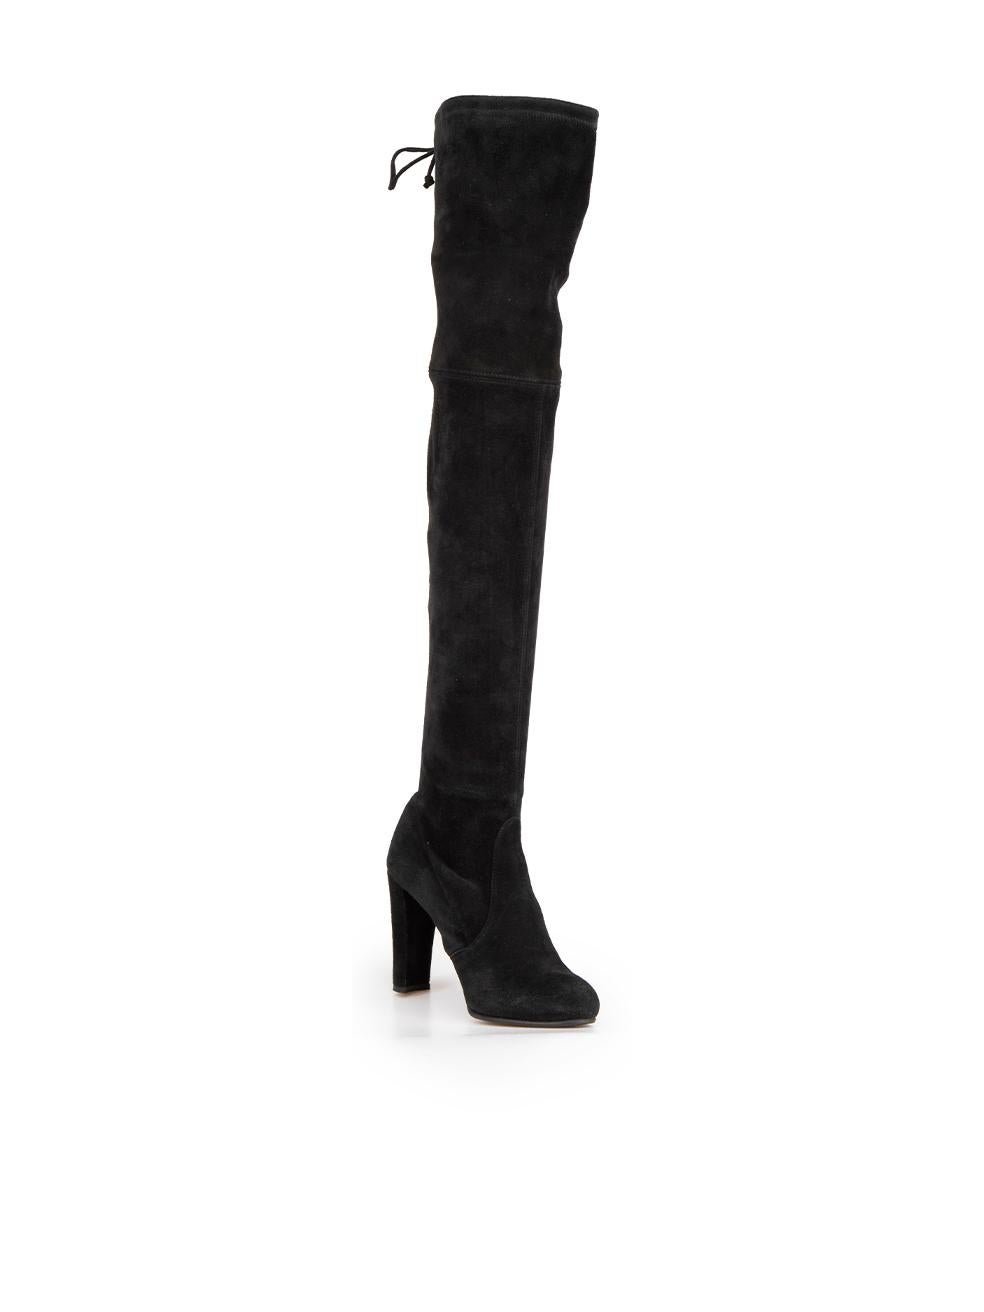 CONDITION is Good. Minor wear to boots is evident. Light wear to overall suede on this used Stuart Weitzman designer resale item.
 
Details
Black
Suede
Over the Knee boots
High heeled
Almond toe
Drawstring tie fastening
 
Made in Spain
